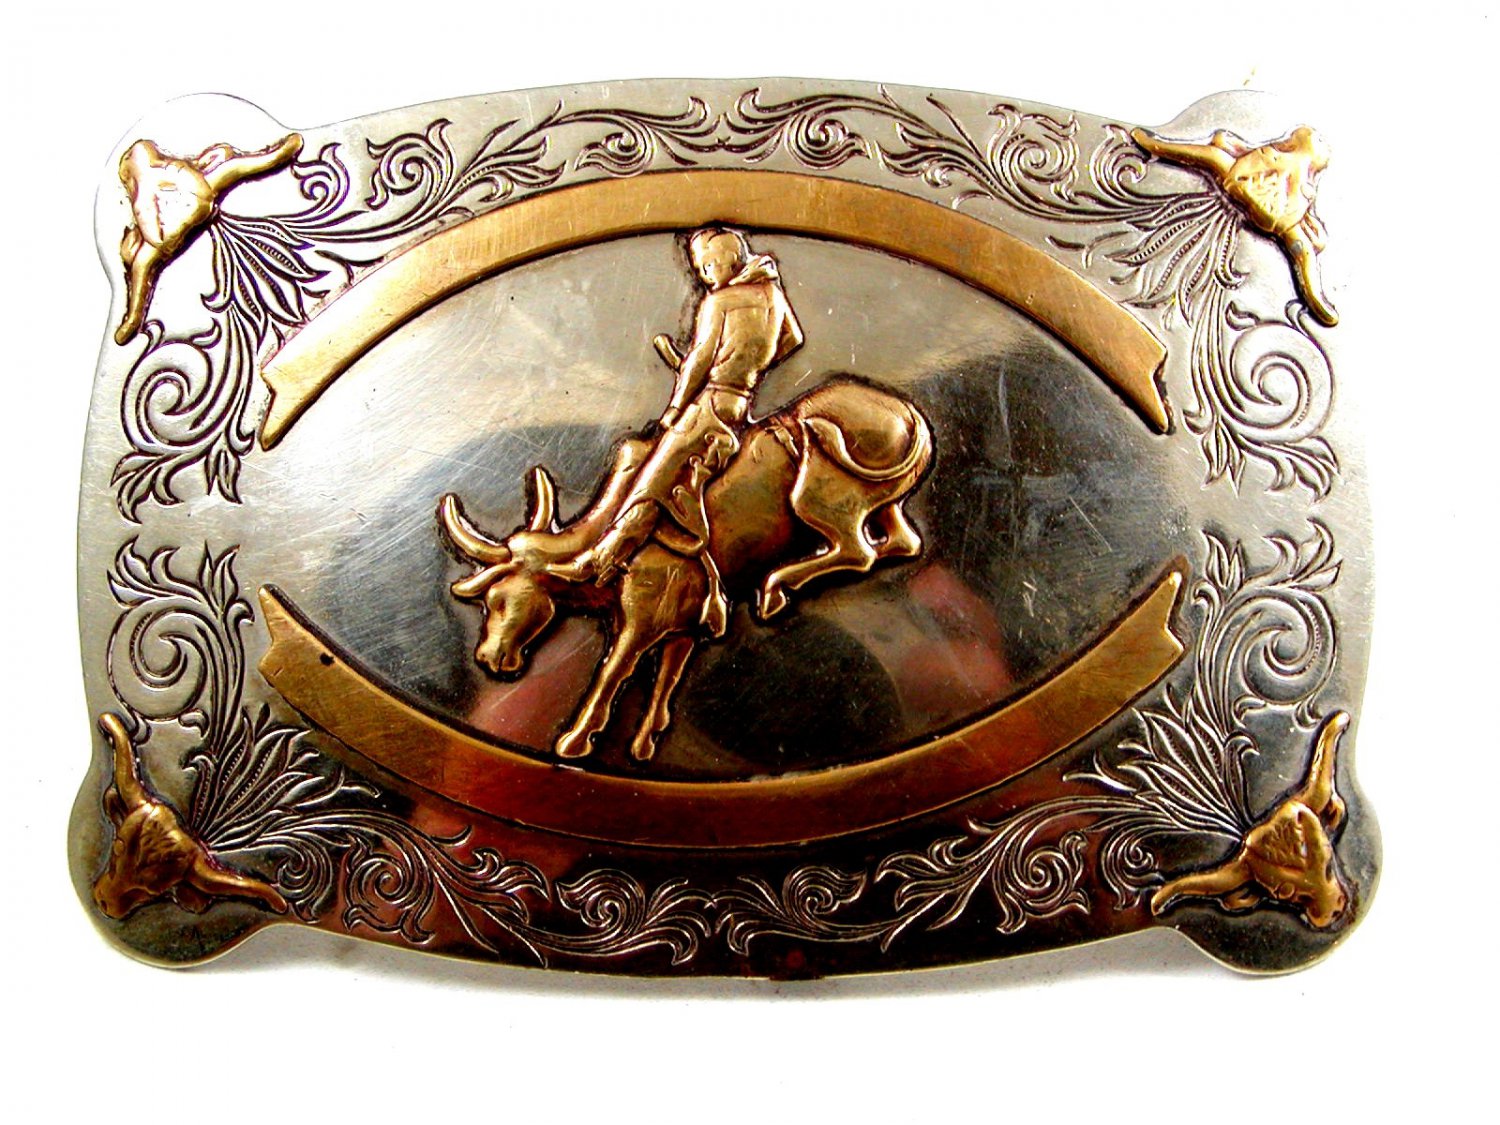 Vintage Western Cowboy Rodeo Bull Riding Belt Buckle by Frontier Buckles